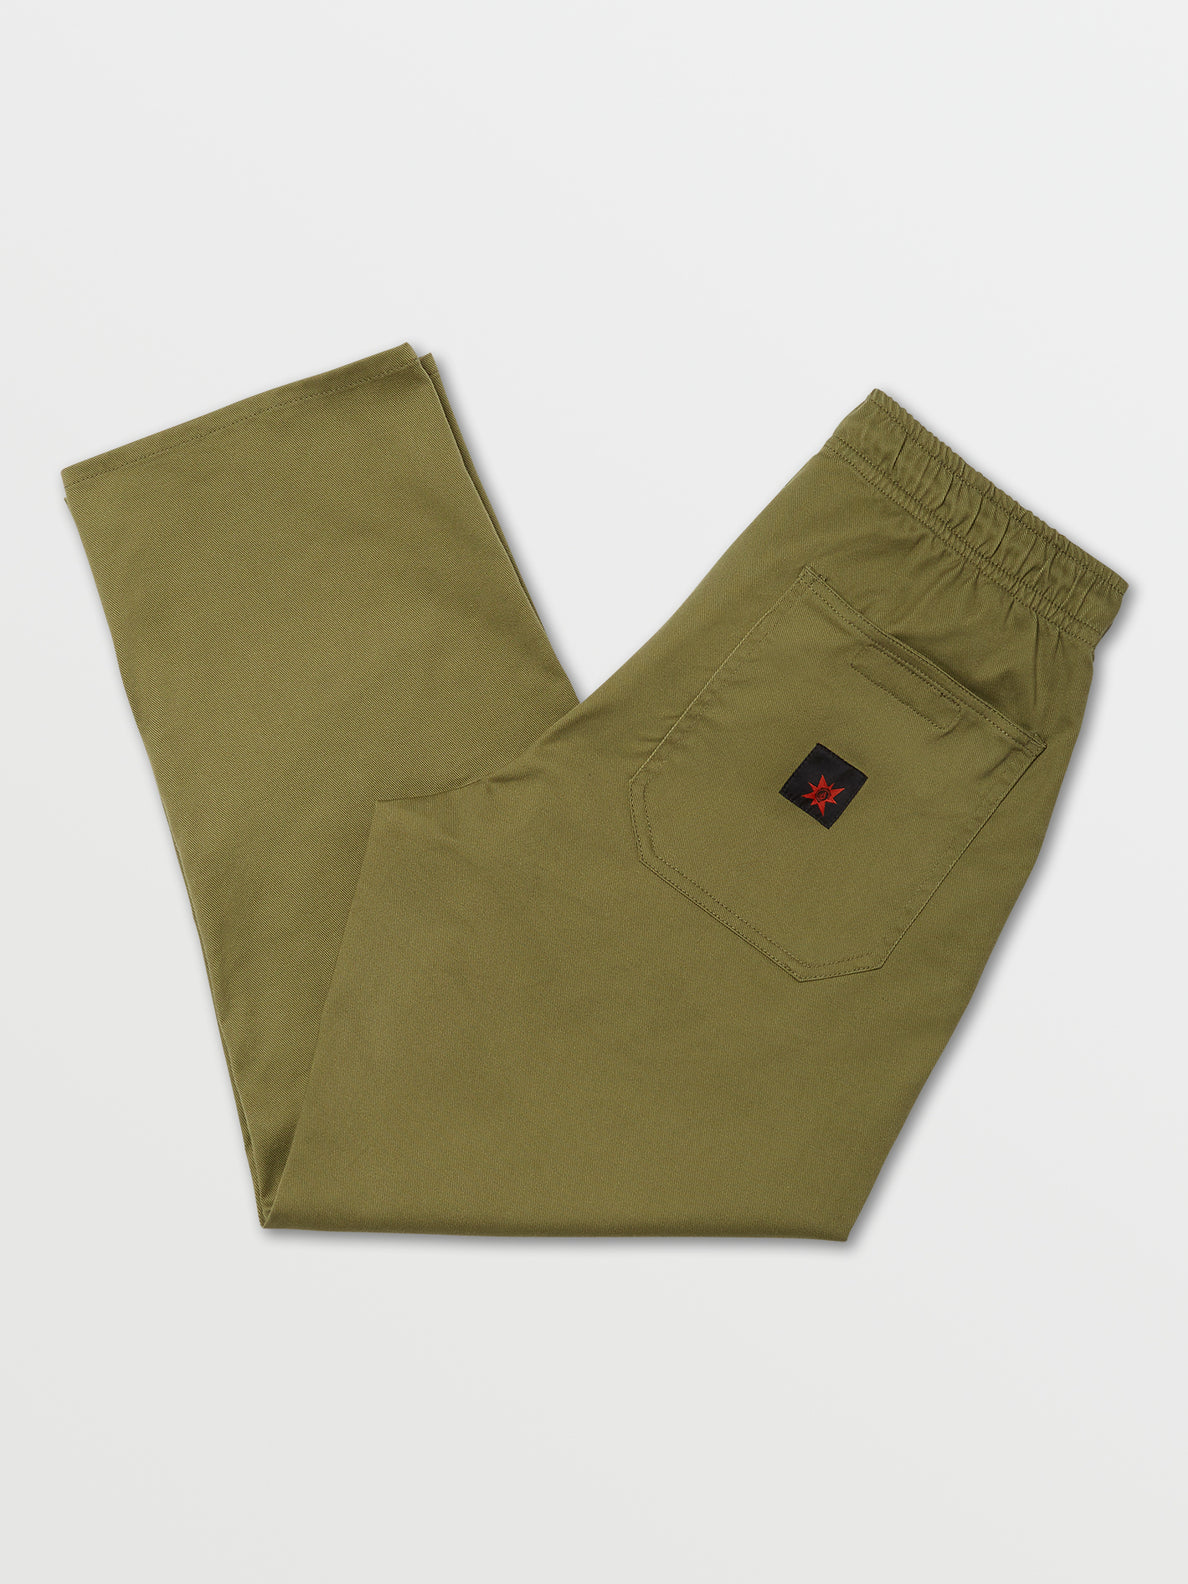 Outer Spaced Solid Ew Pant Martini Olive (A1242004_MTO) [B]